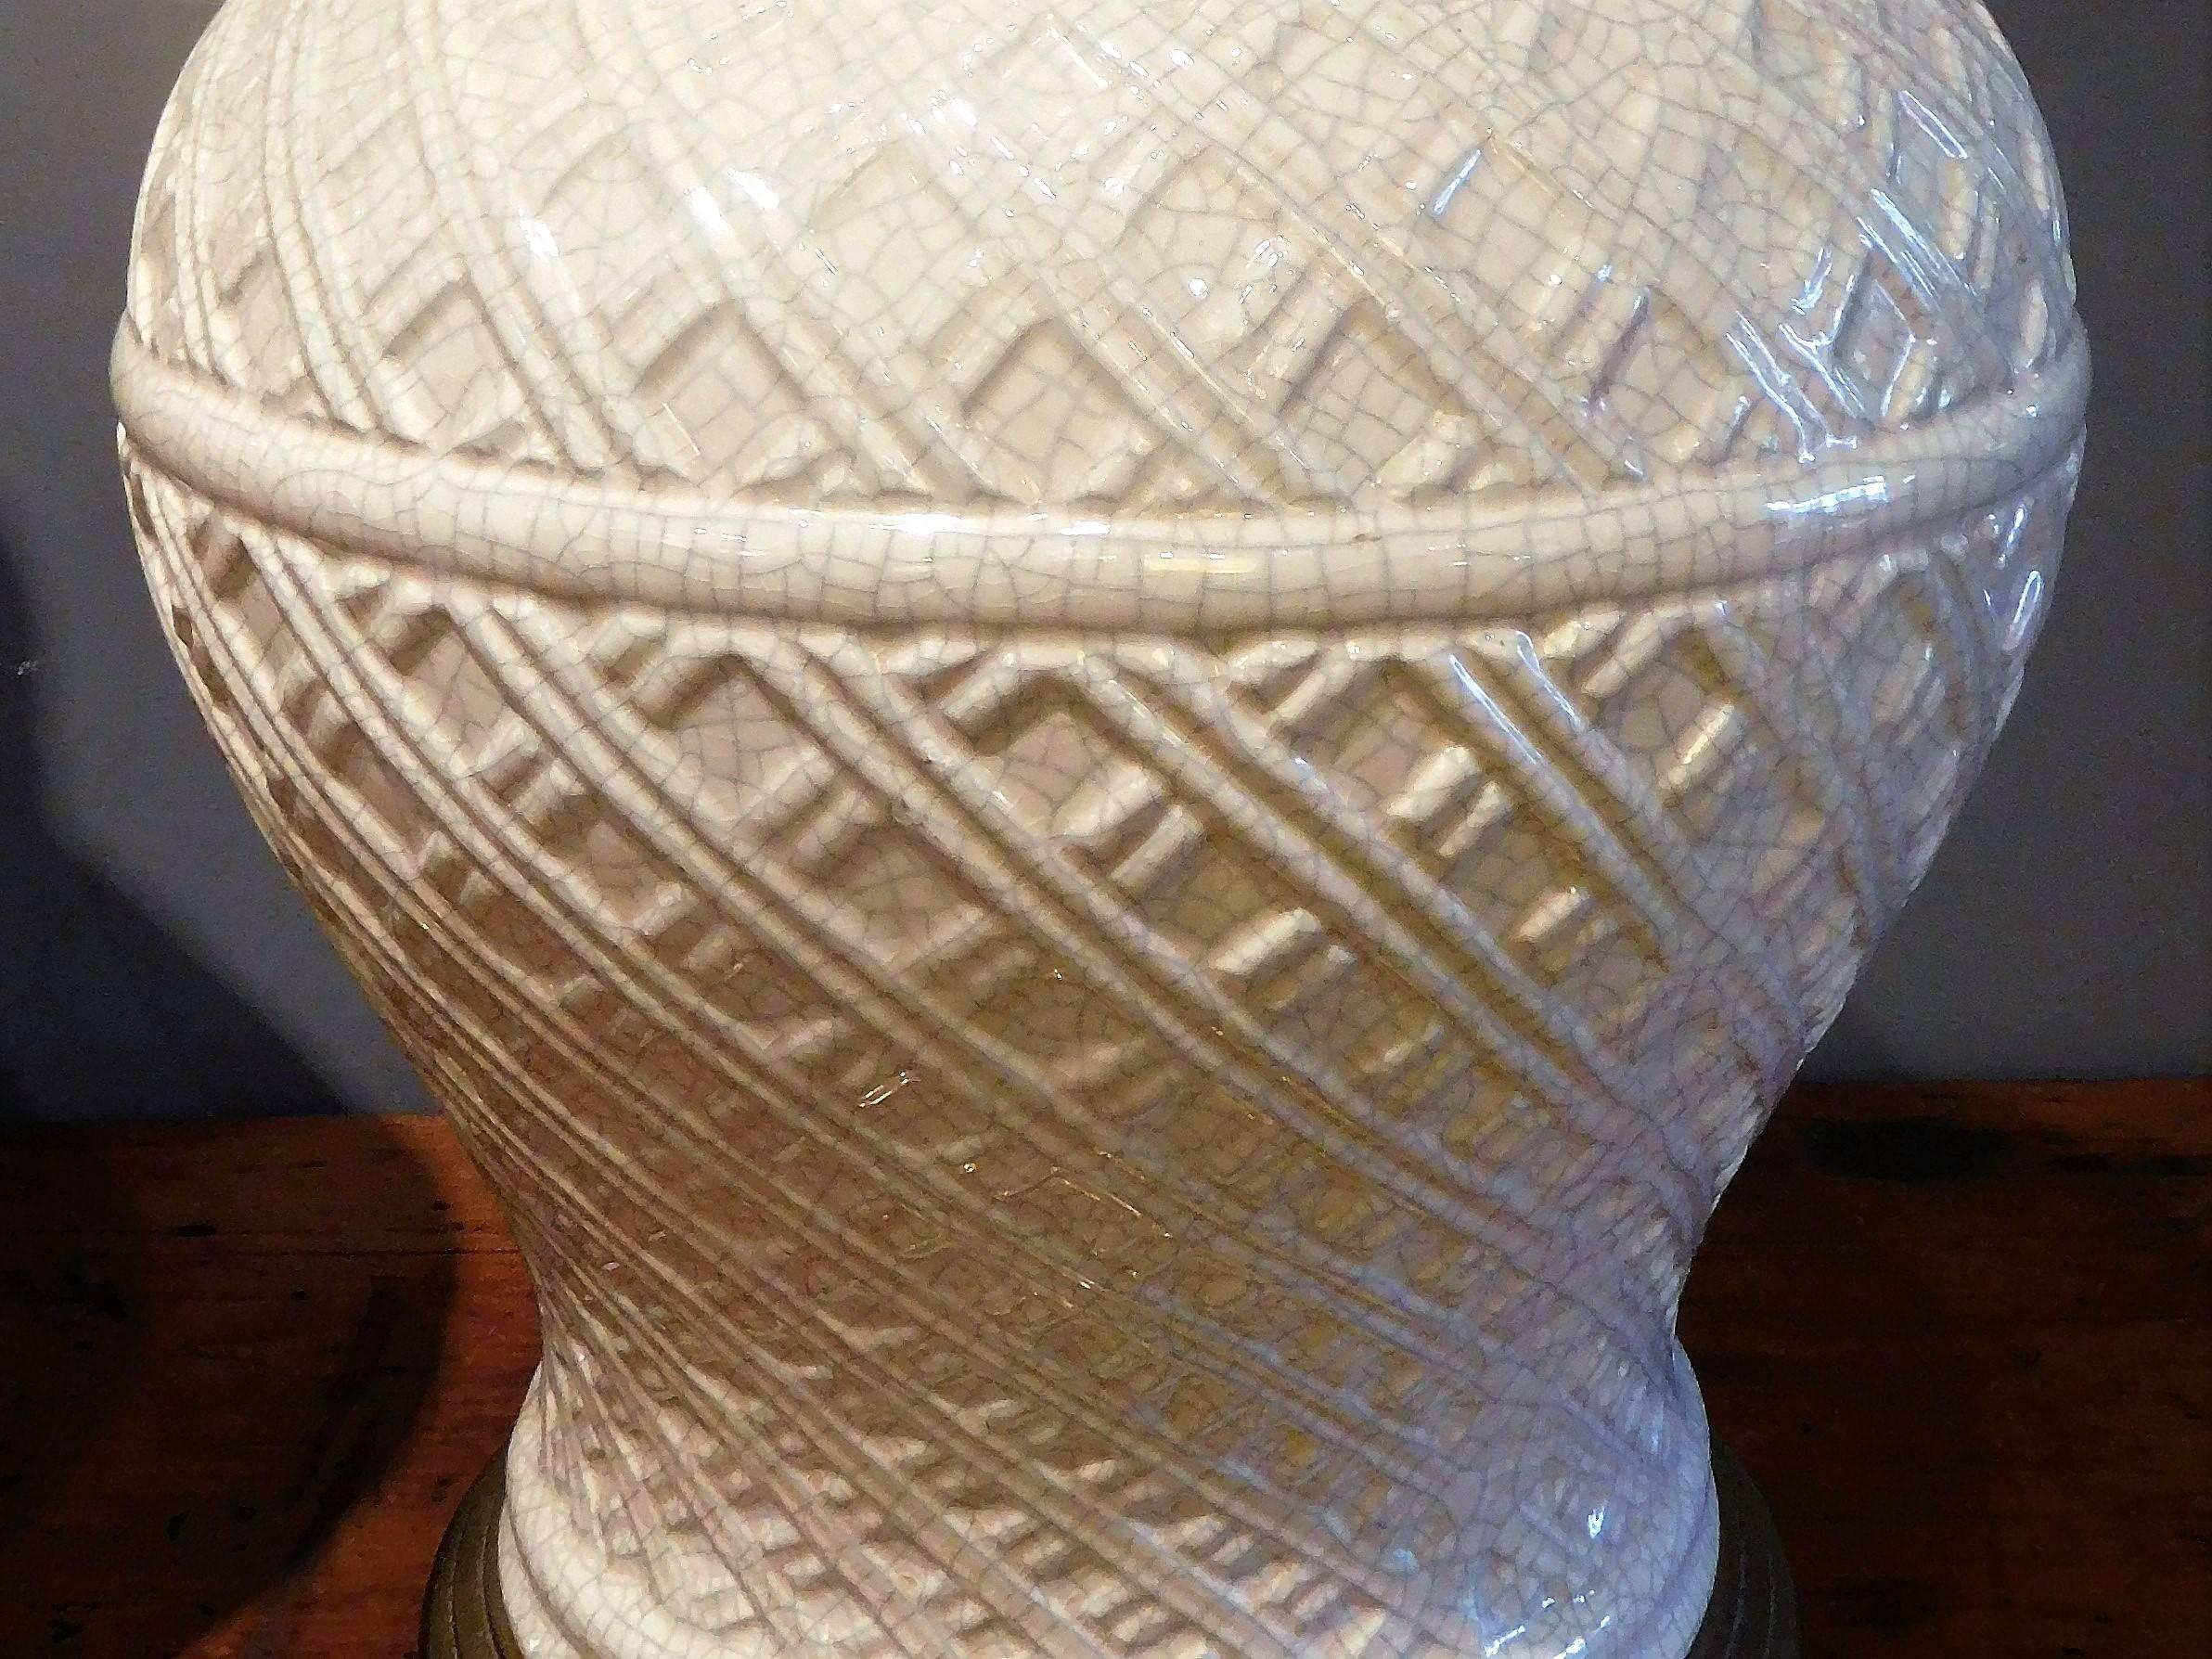 American Pair of Ceramic Basket-Weave Paul Hanson Lamps with Ivory Crackle Glaze, 1955 For Sale